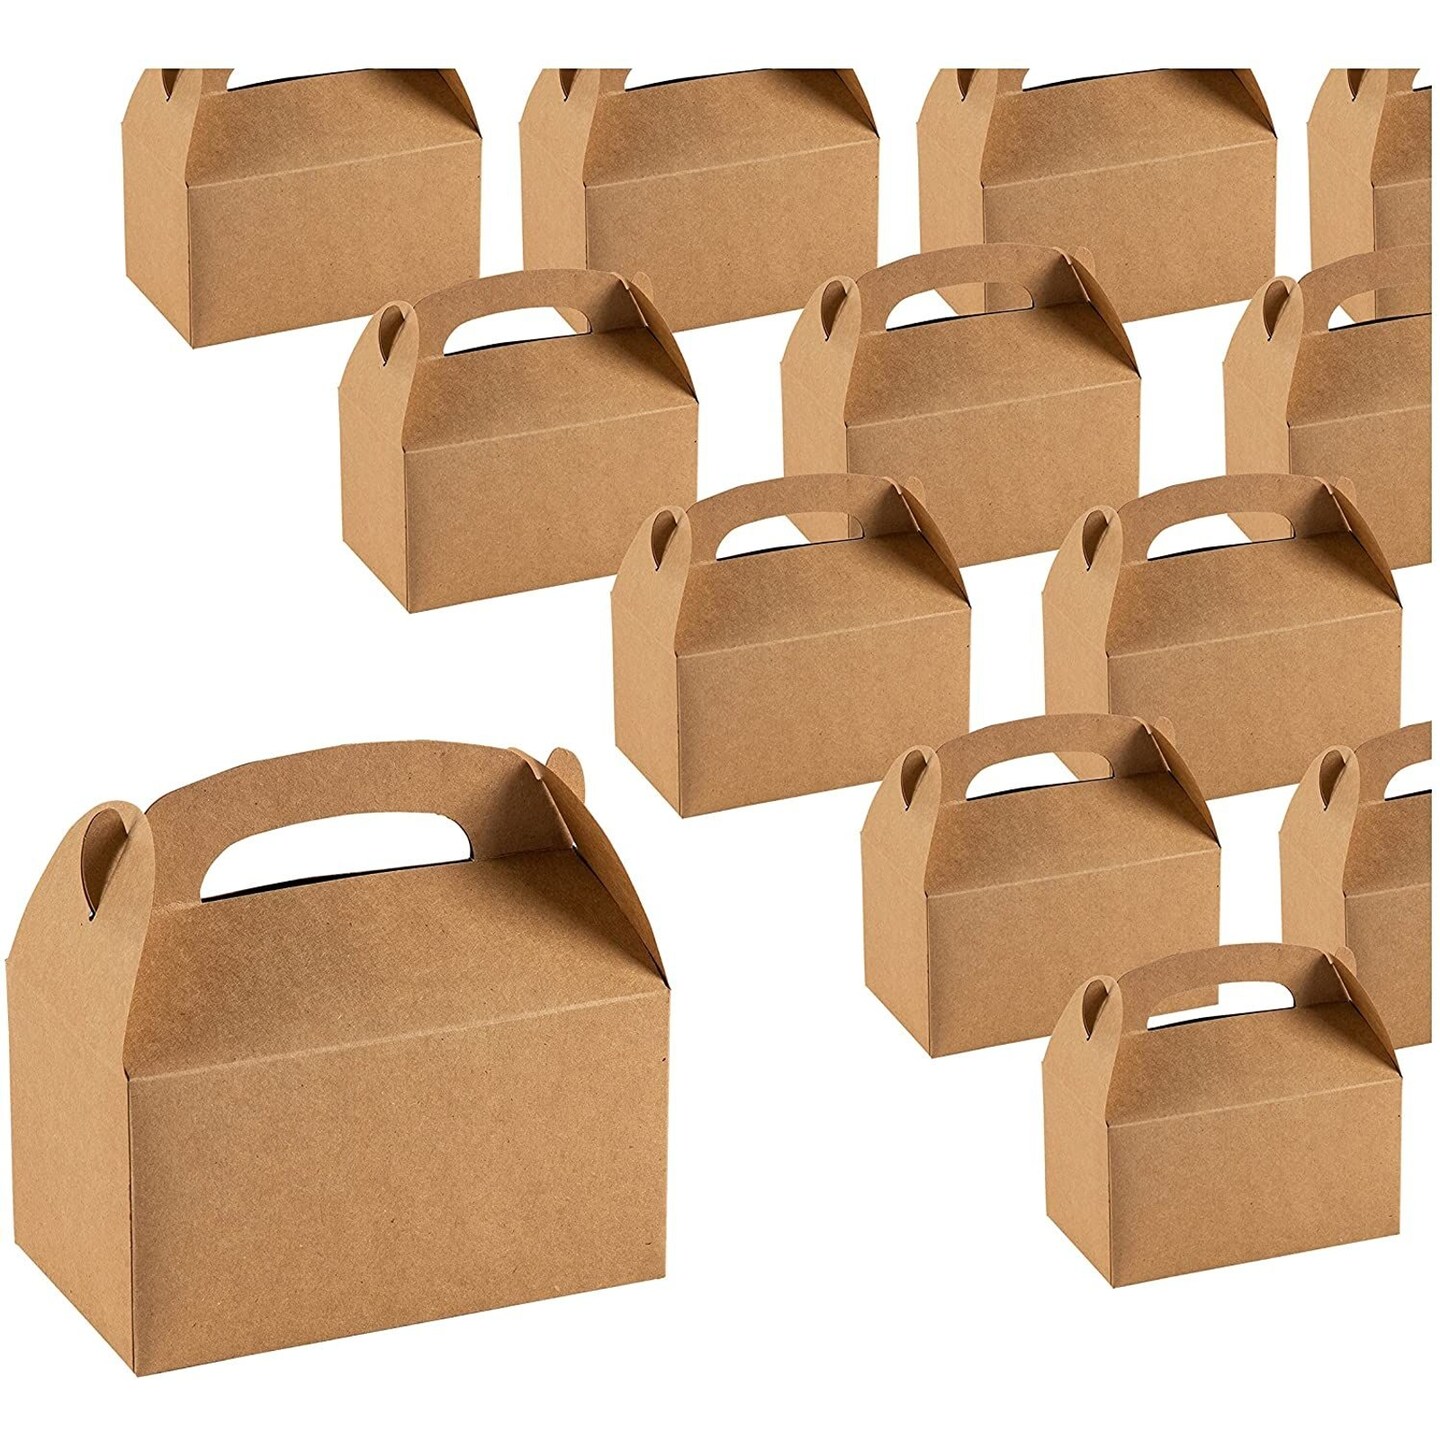 Treat Boxes - 24-Pack Paper Party Favor Boxes, Brown Kraft Goodie Boxes for Birthdays and Events, 2 Dozen Party Gable Boxes, 6 x 3.3 x 3.6 Inches